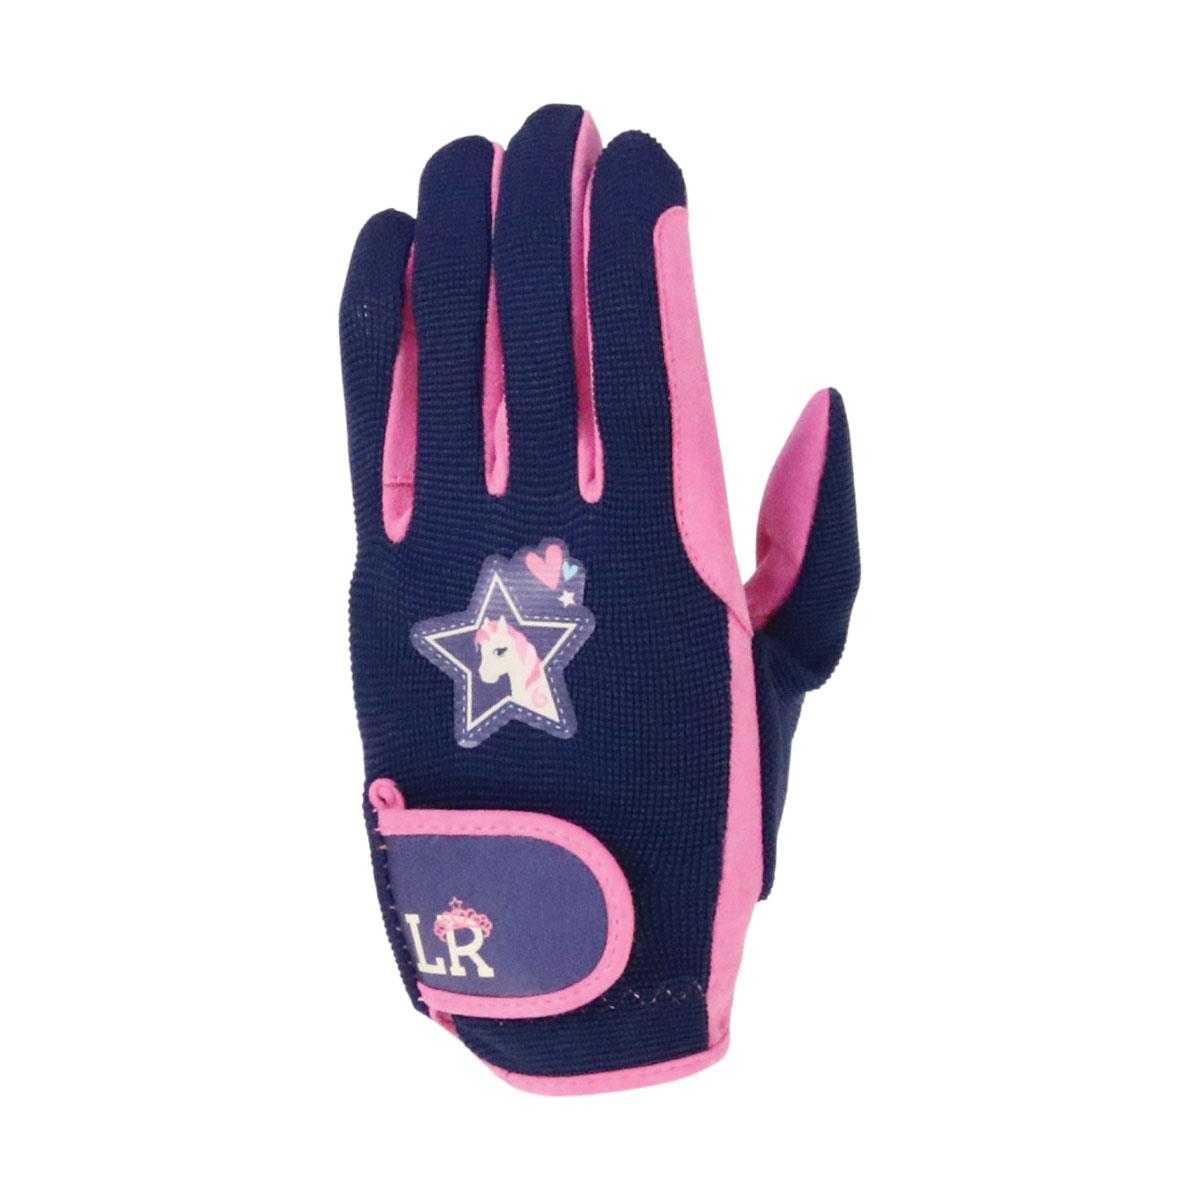 I Love My Pony Collection Horse Riding Gloves by Little Rider - Just Horse Riders